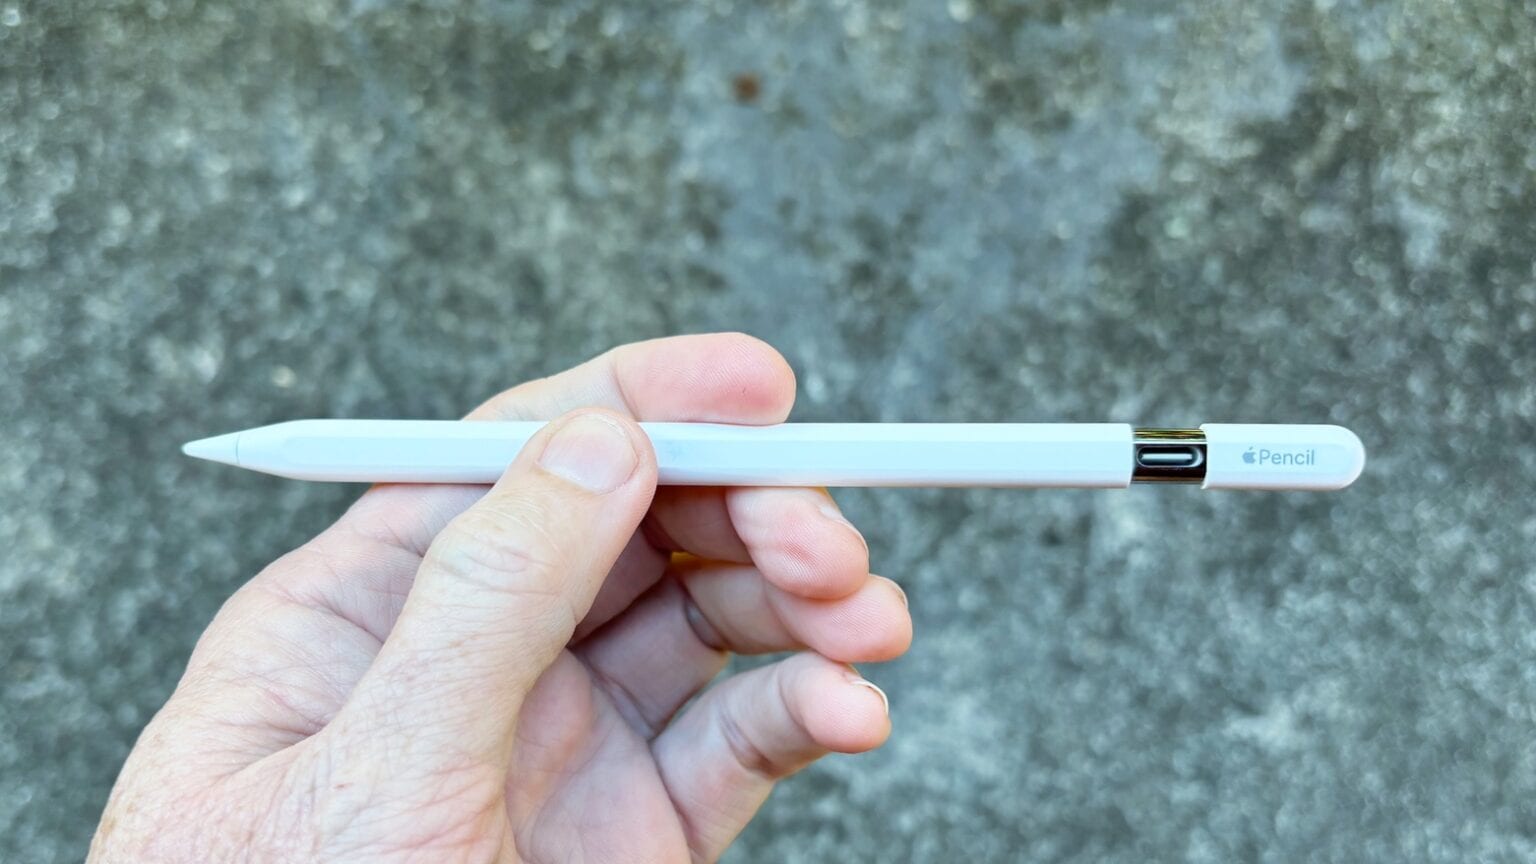 New USB-C Apple Pencil is lower in price but not usability [Review]